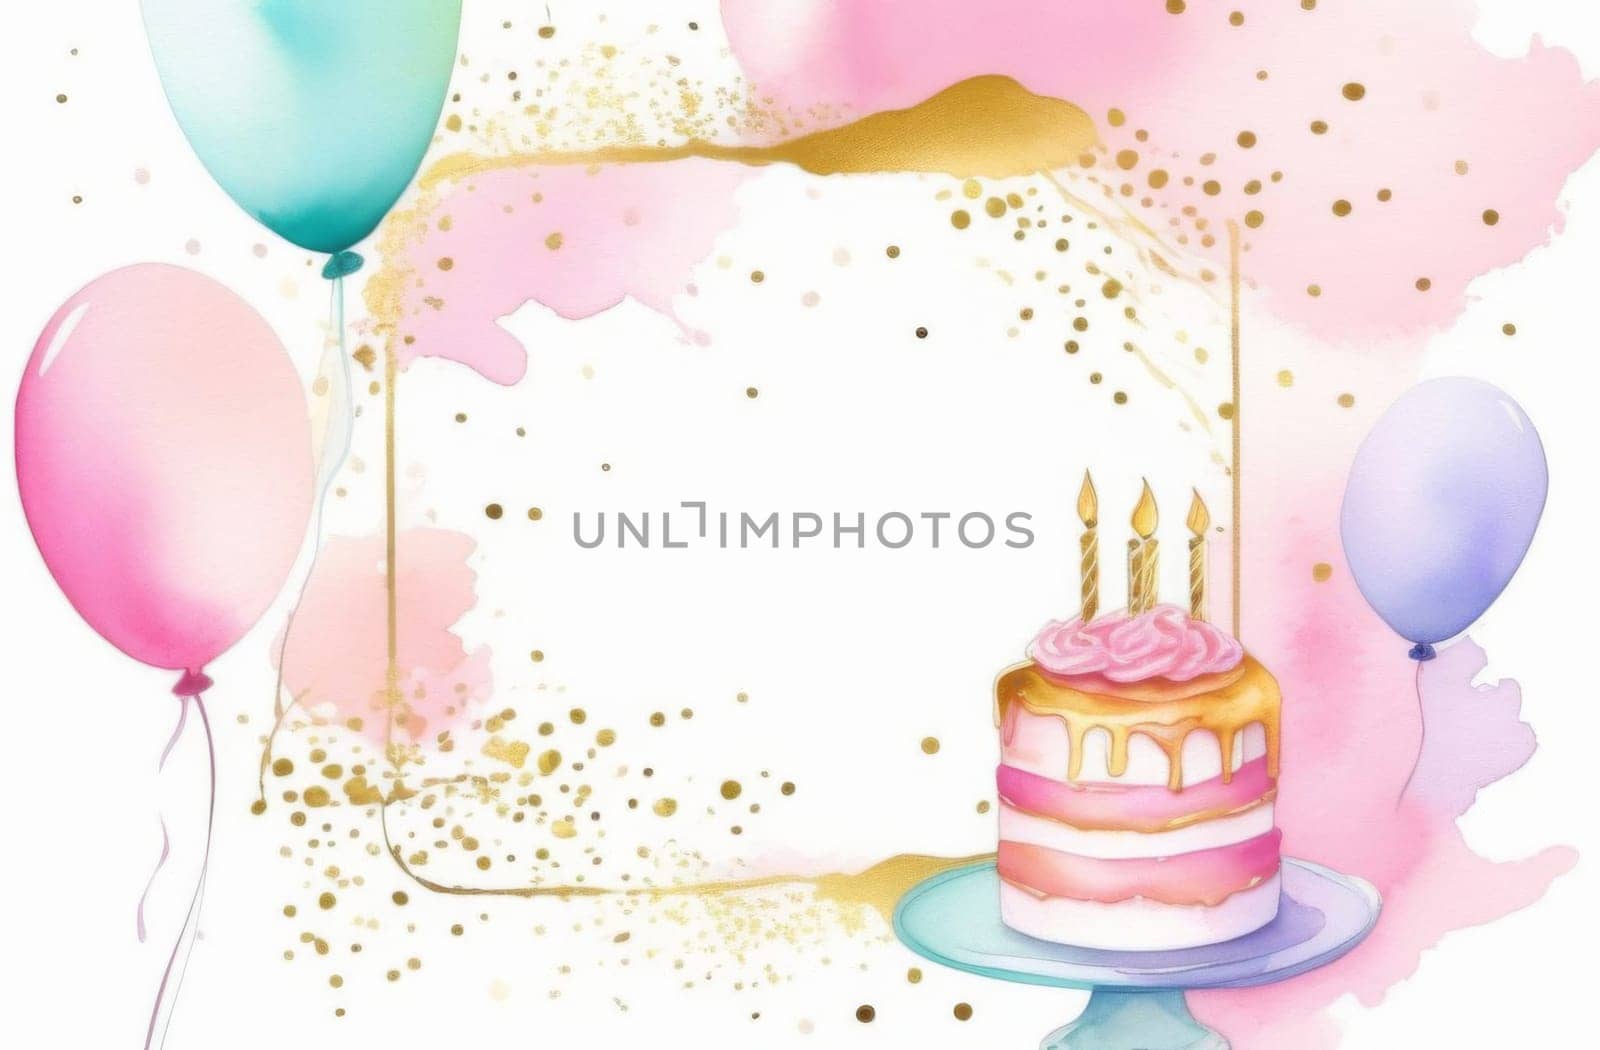 Birthday invitation with balloons and cake with space for text in the middle